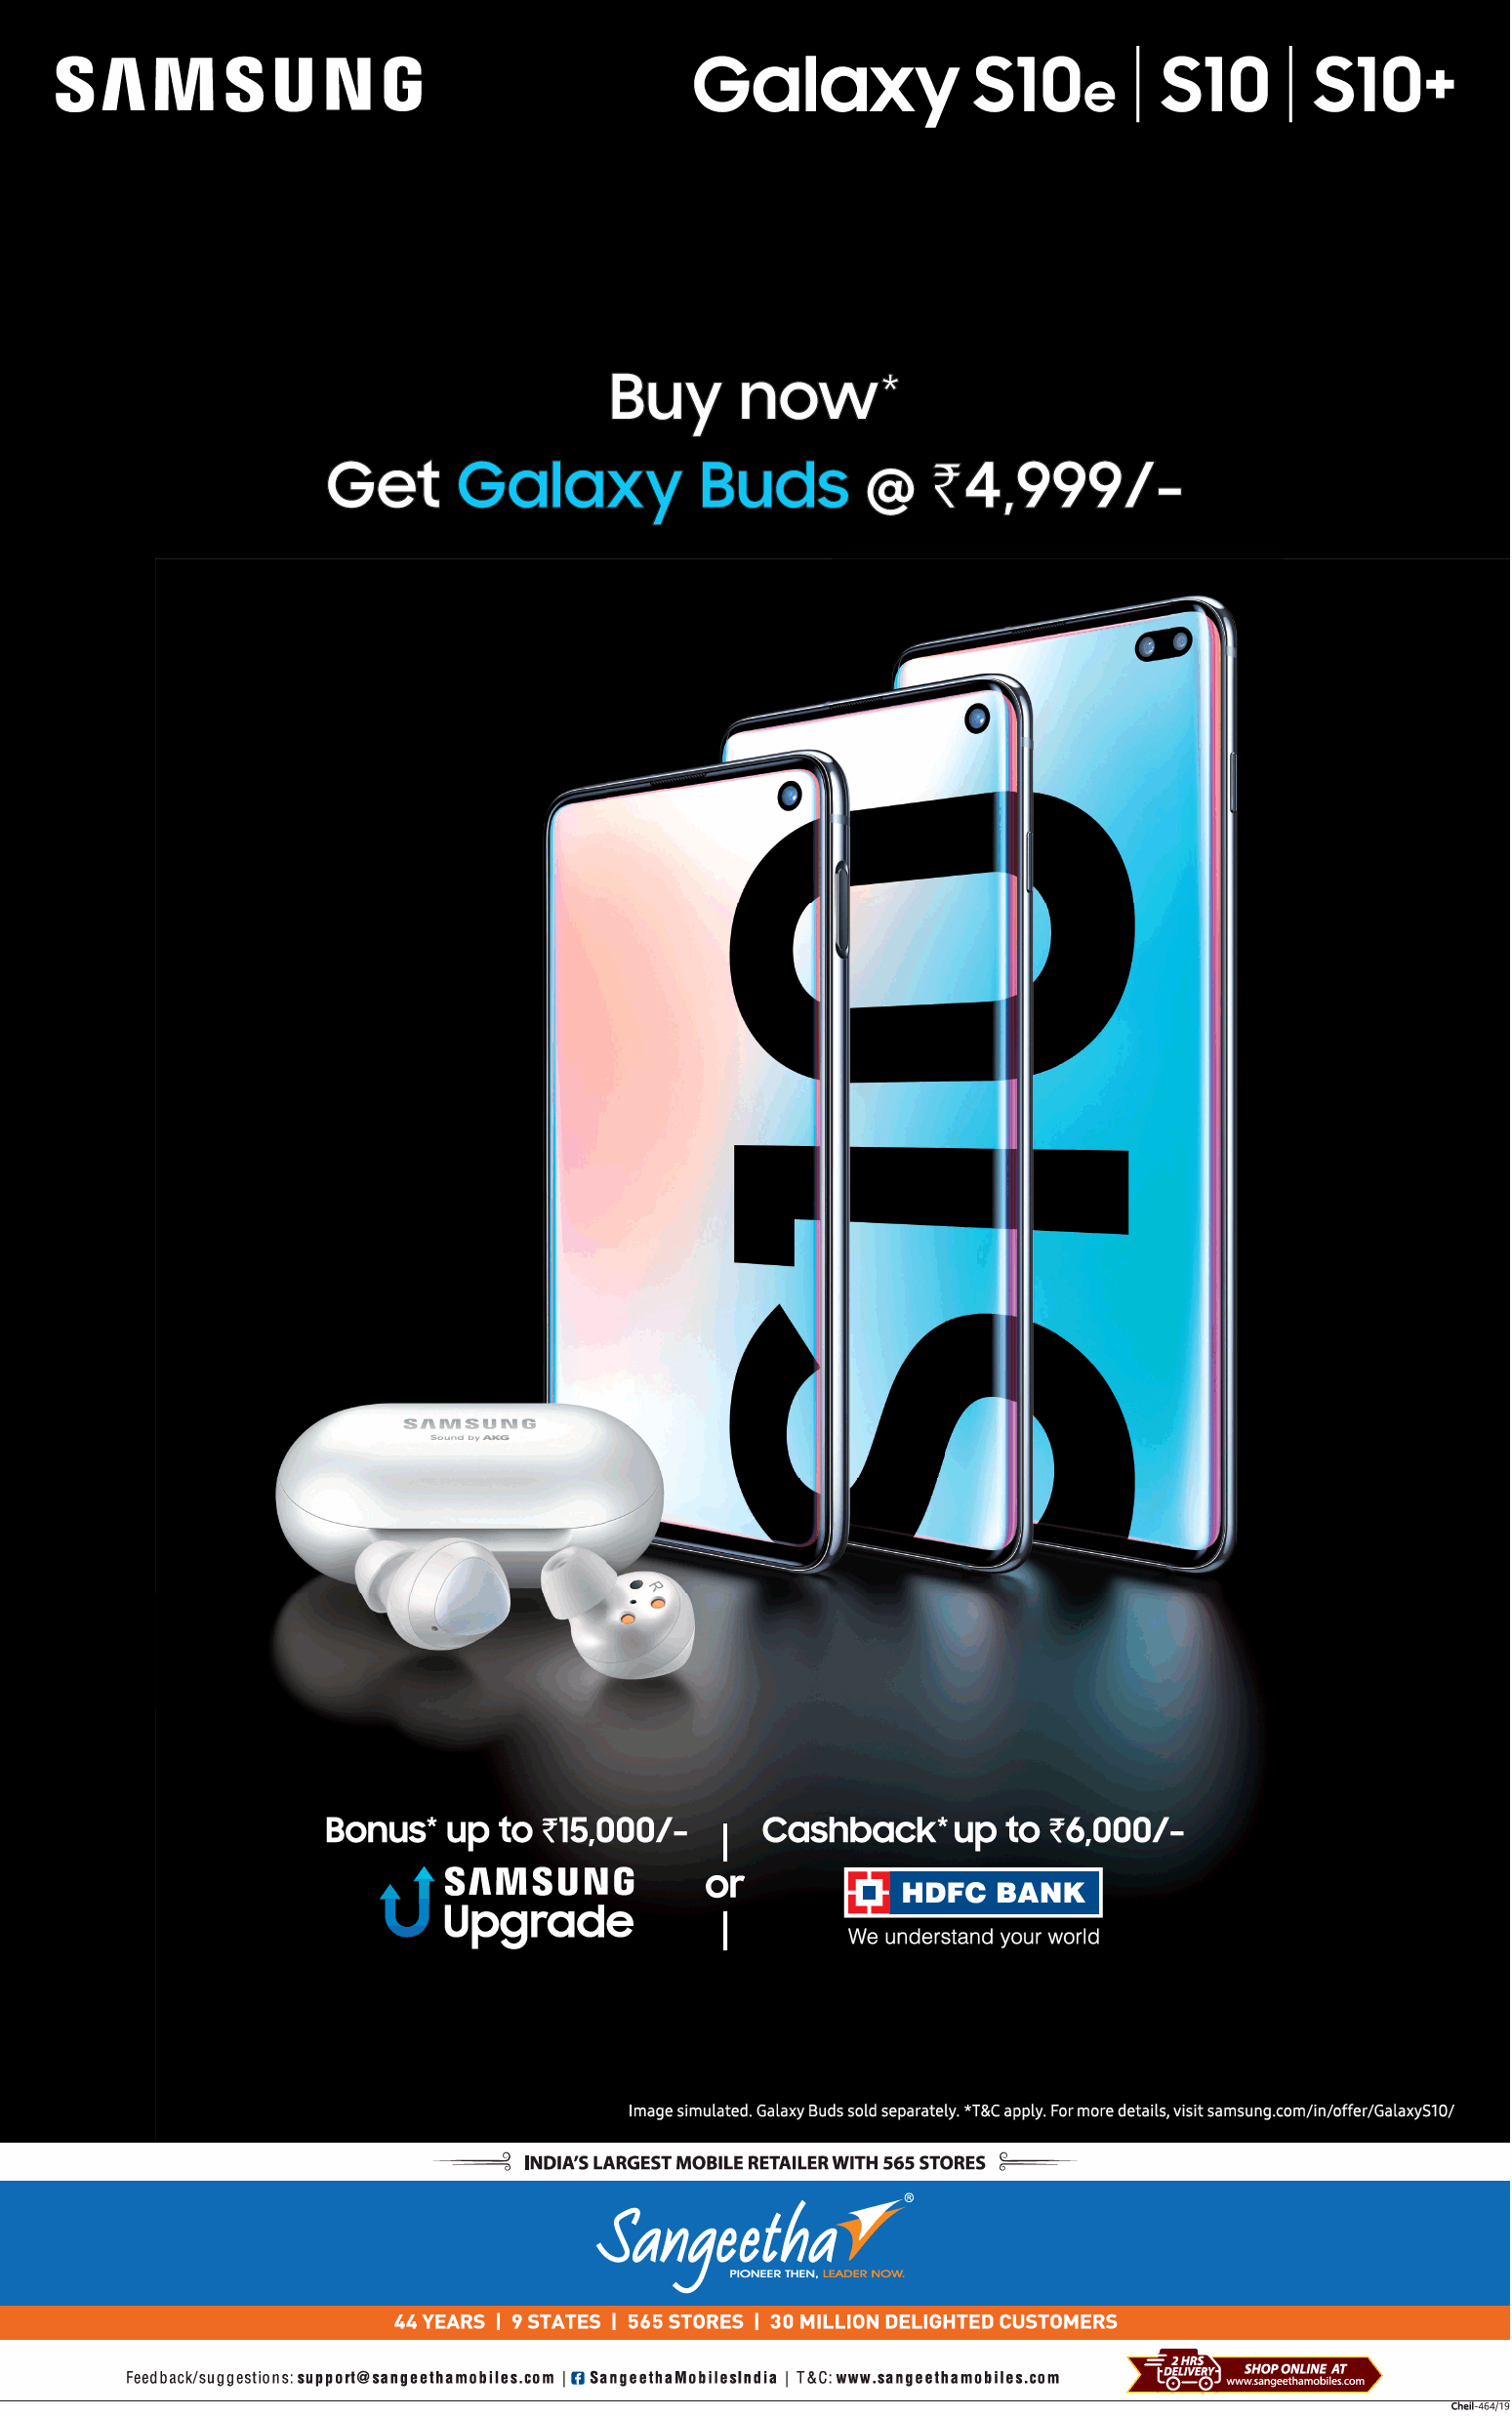 samsung-s10e-s10-s10-plus-buy-now-get-galaxy-buds-at-rs-4999-ad-bangalore-times-14-03-2019.png